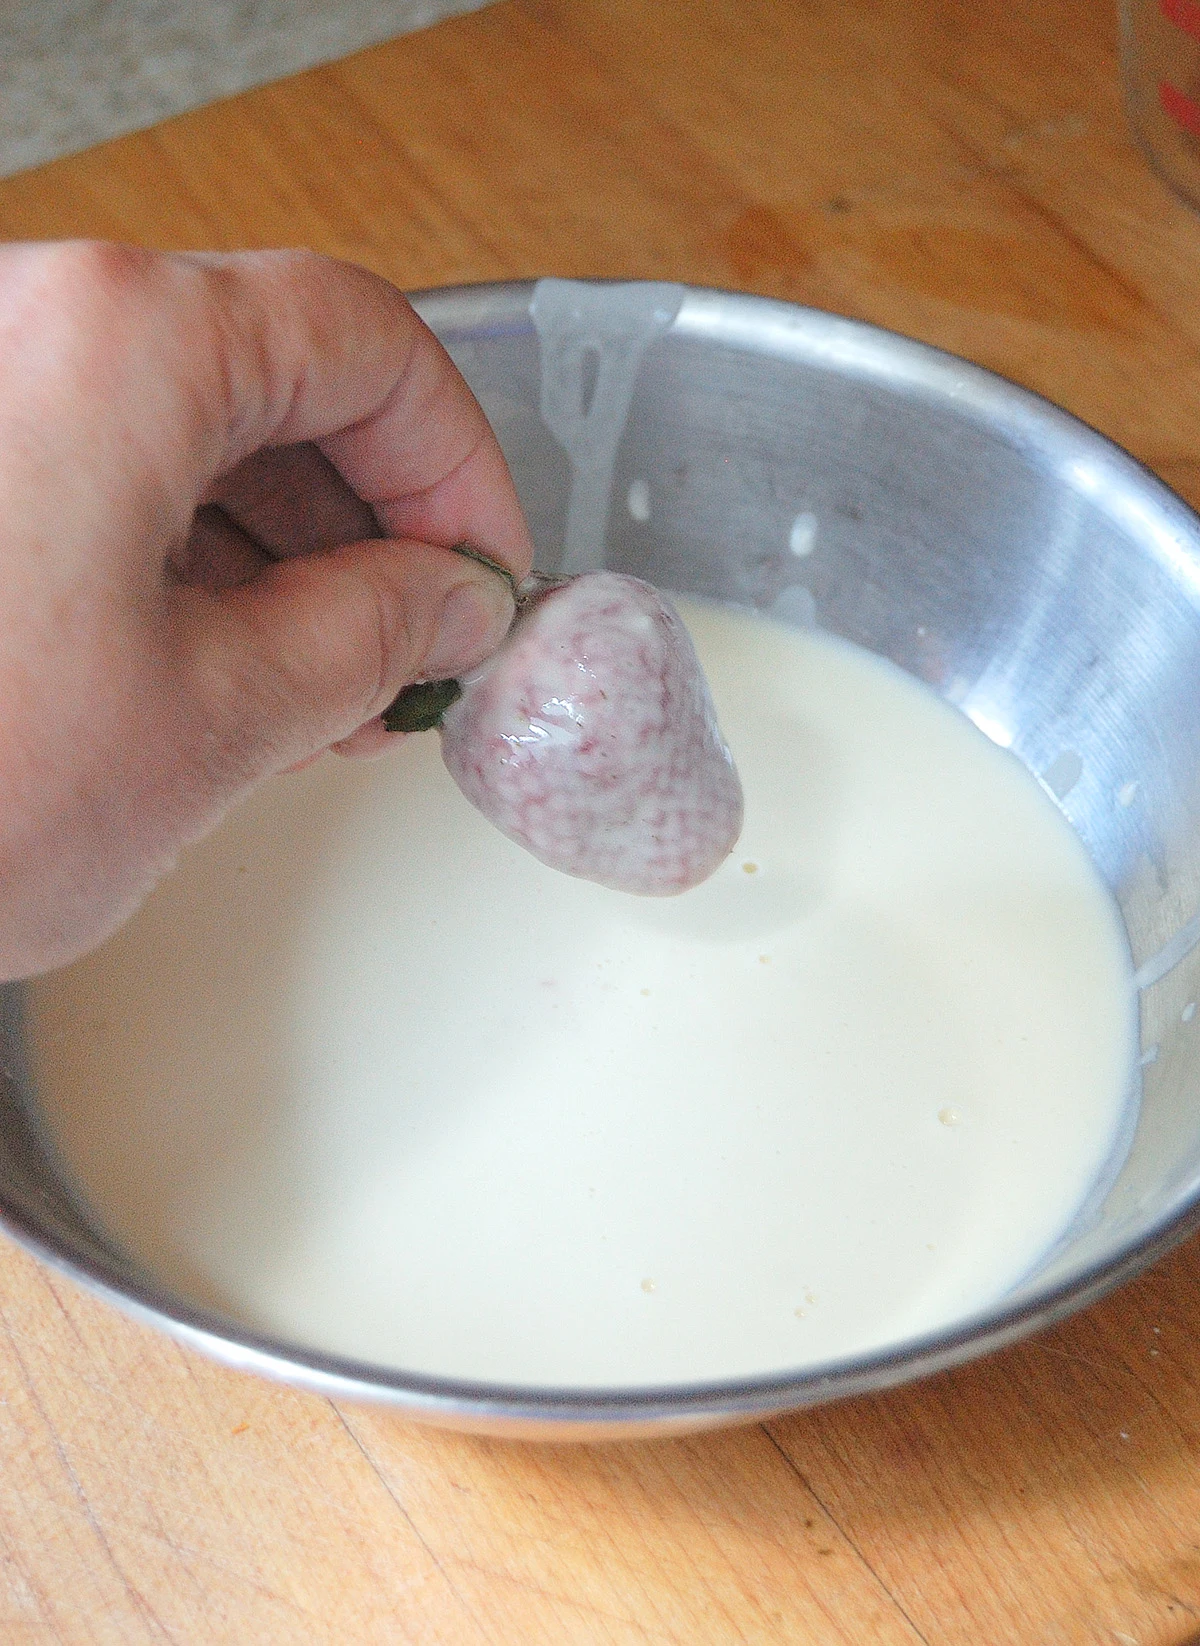 A hand dipping a strawberry into batter.